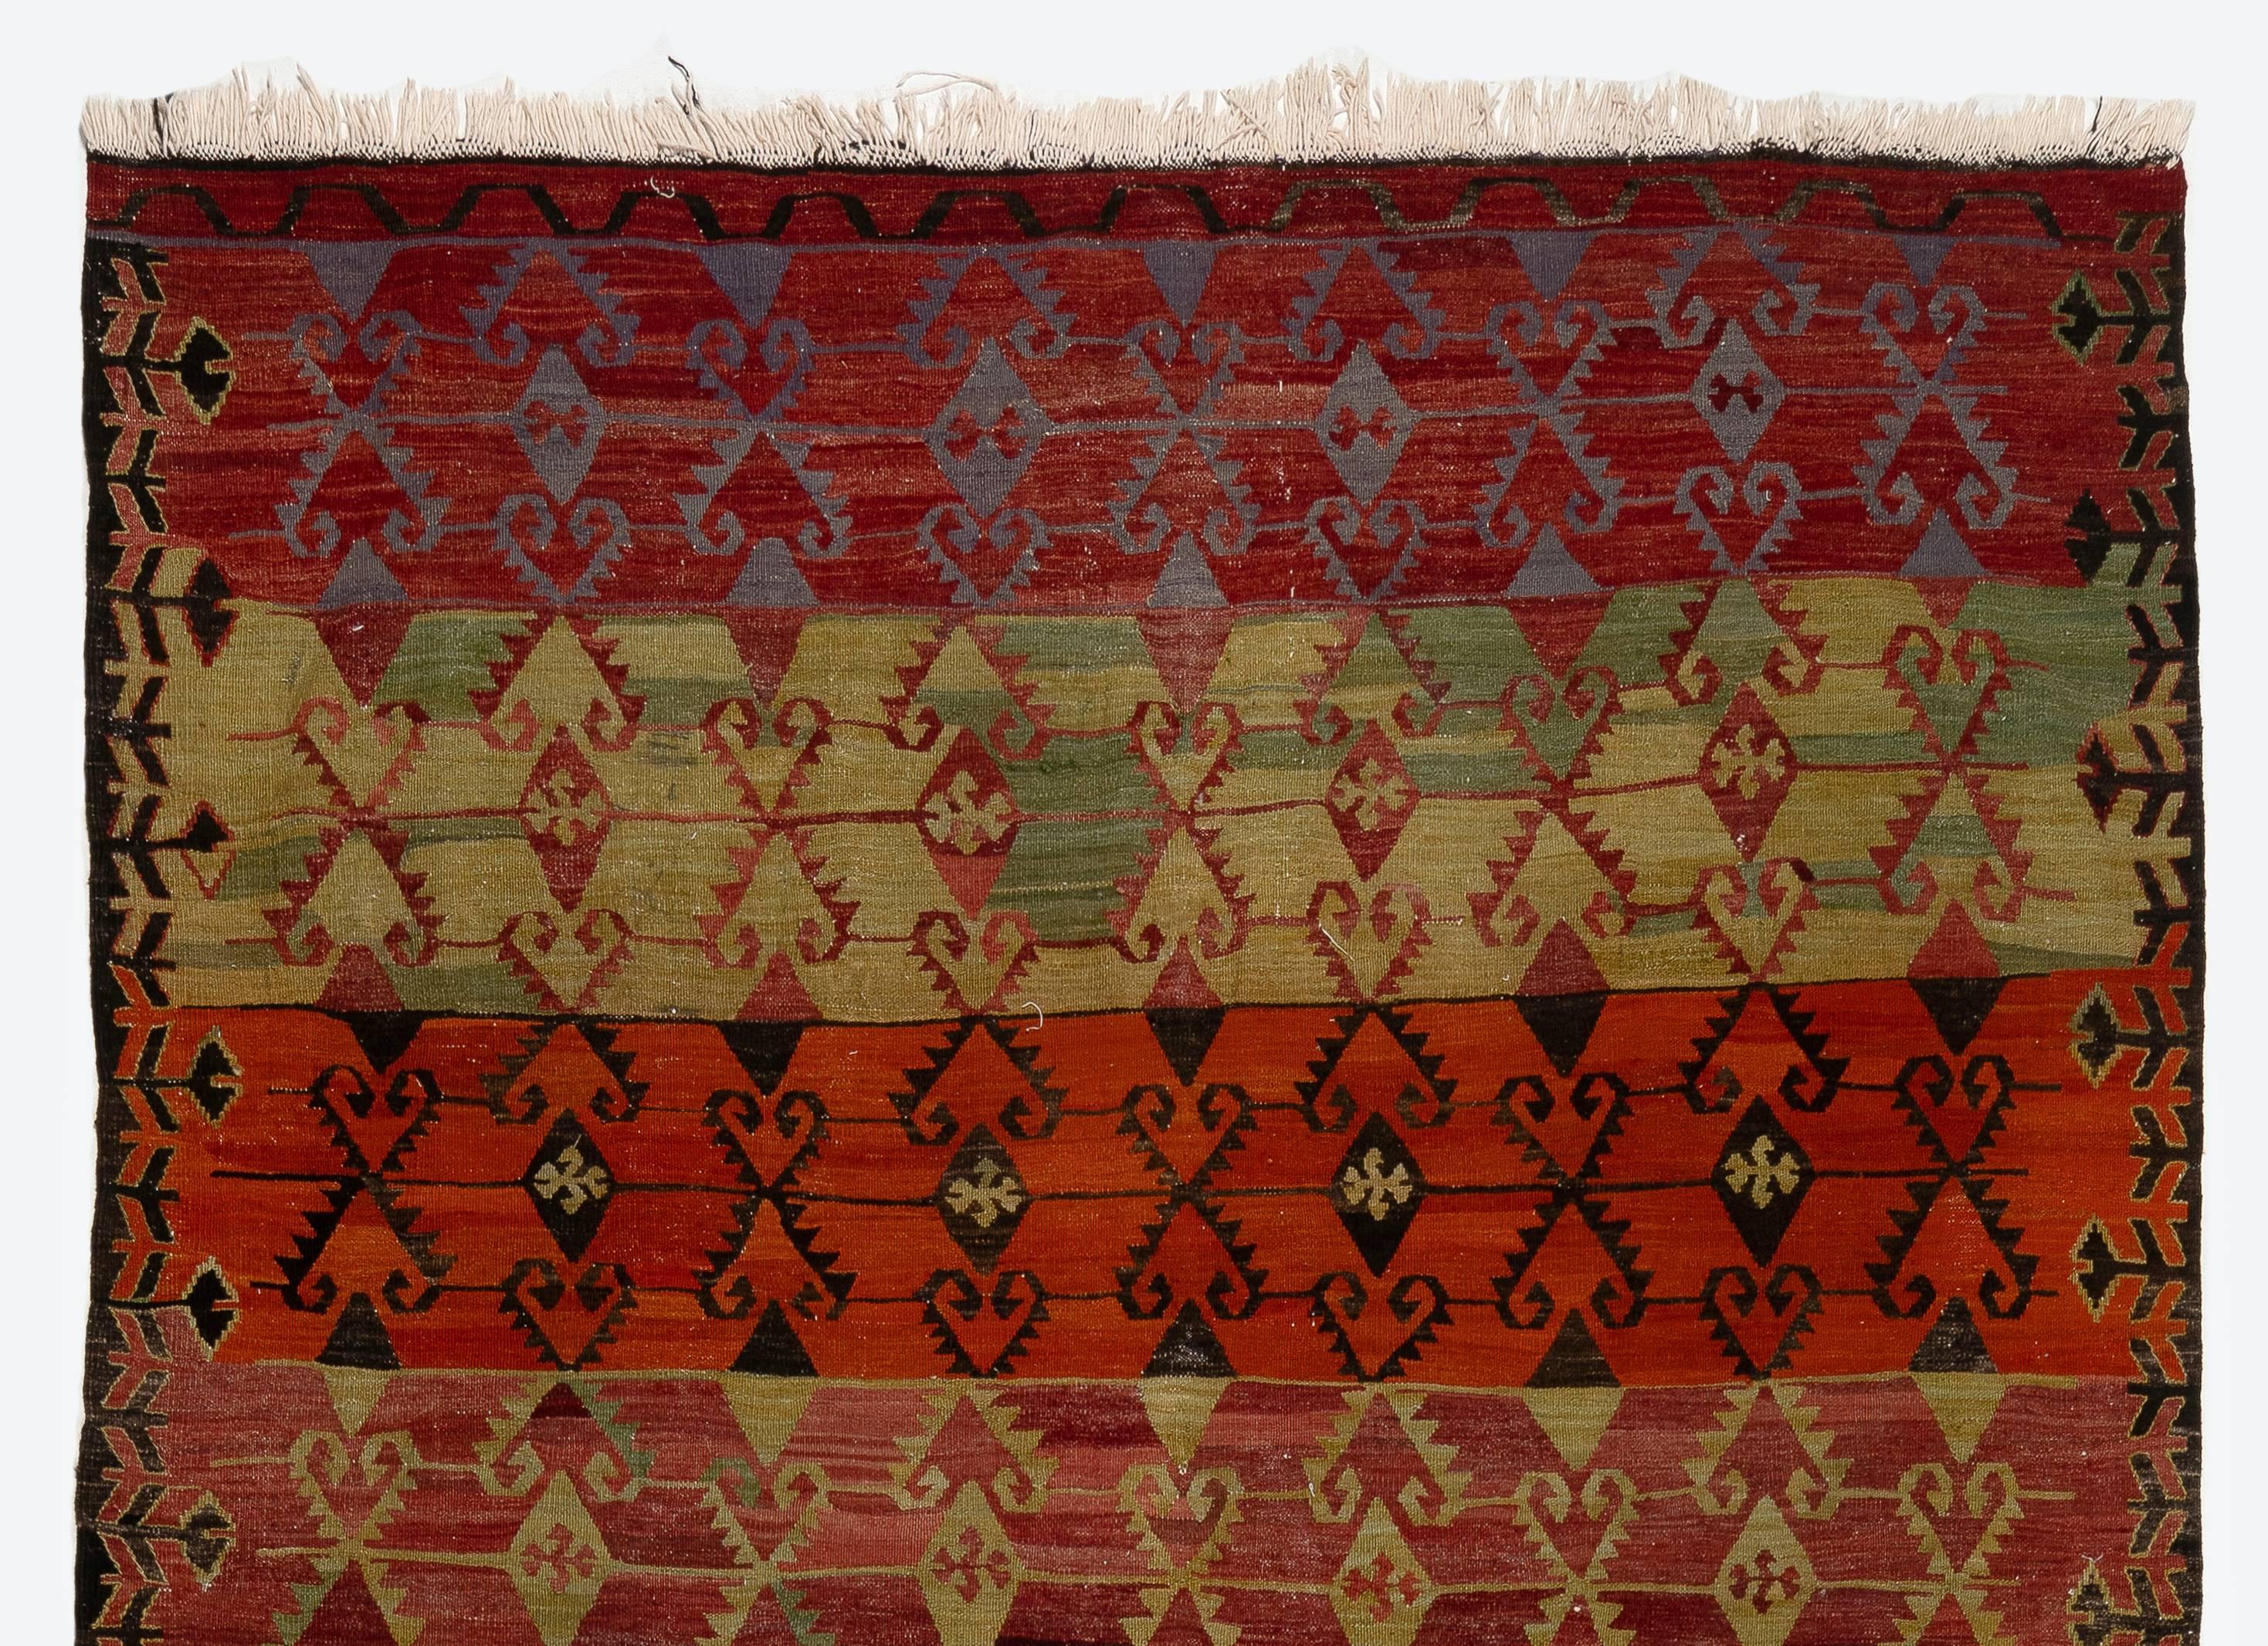 Vintage handwoven flat-weave (Kilim) with geometric design, 100% wool. Measures: 6 x 13 ft
Reversible; both sides can be used.
Ideal for both residential and commercial interiors.
We can supply a suitable rug-pad if requested for extra cushioning